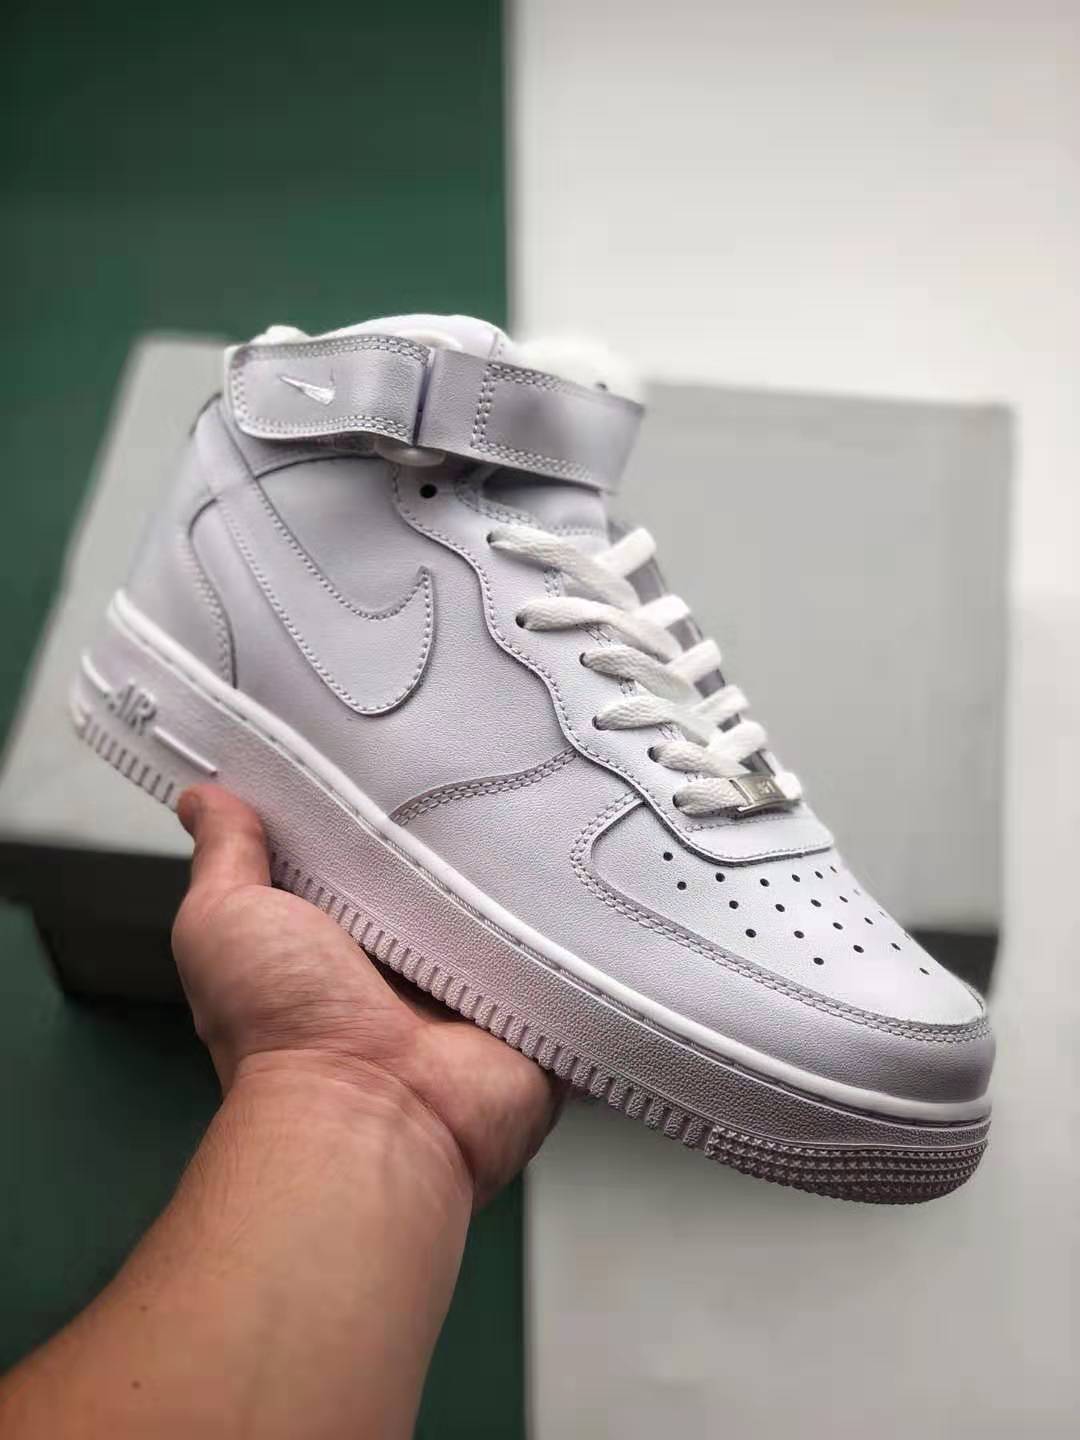 Nike Air Force 1 Mid '07 'White' 315123-111 - Classic Sneaker for Style and Comfort.